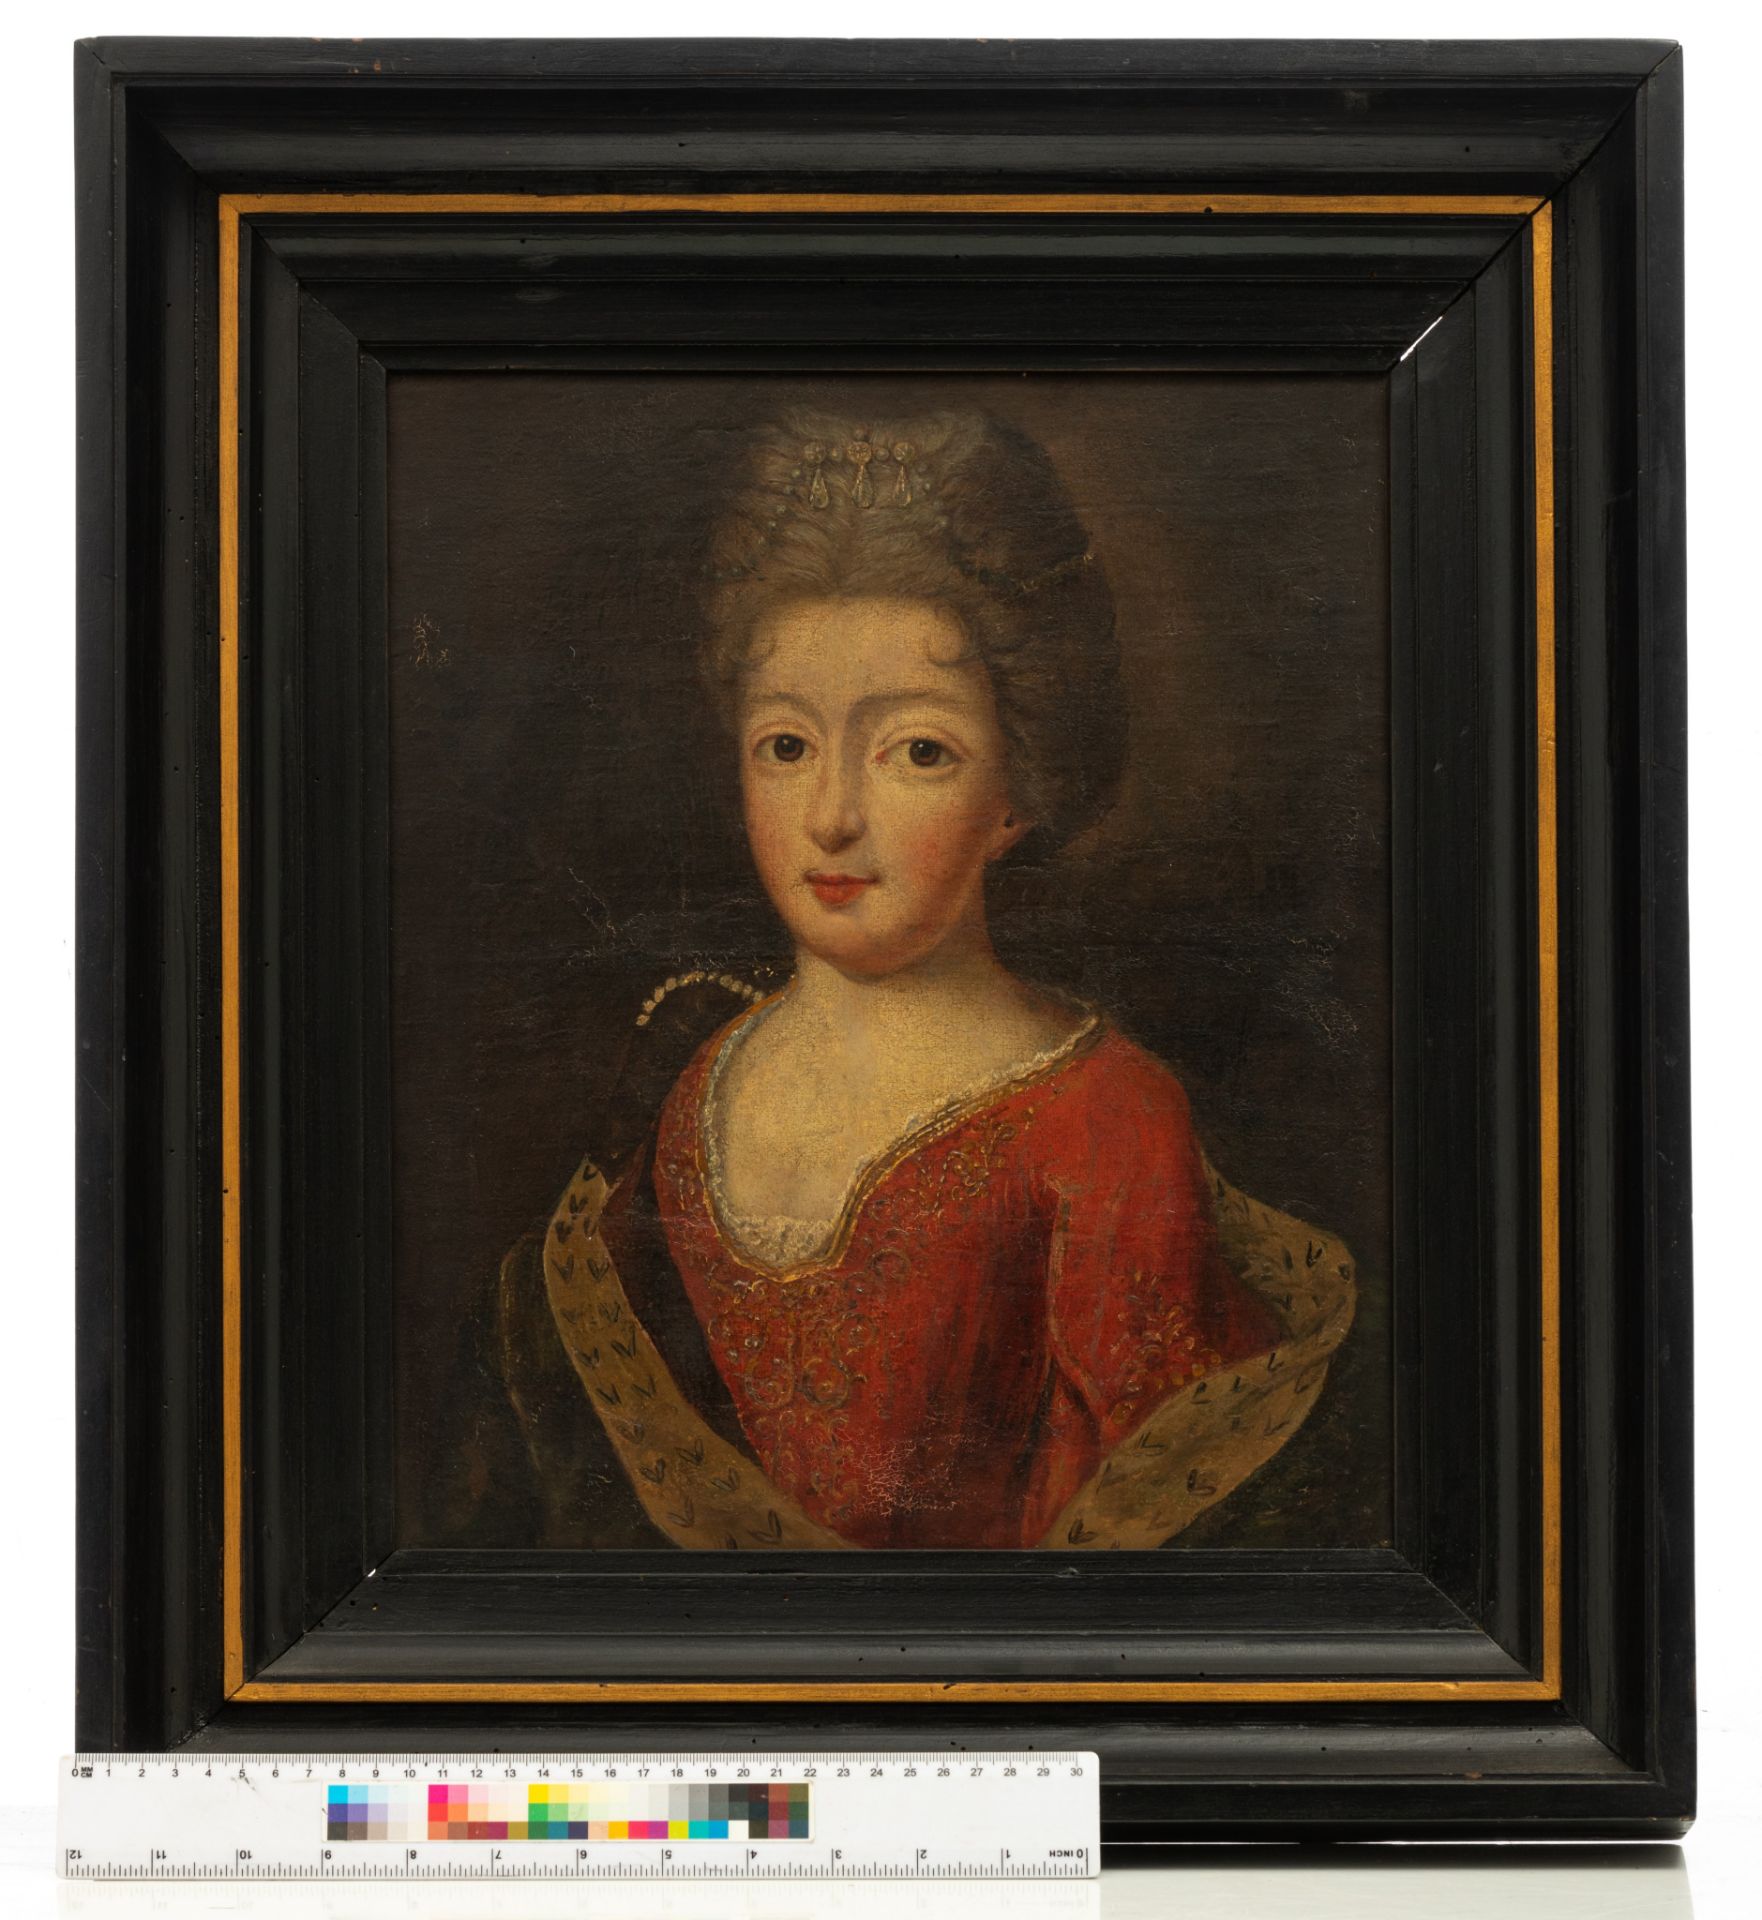 The portrait of a noble lady, 18thC, 32 x 39 cm - Image 6 of 13